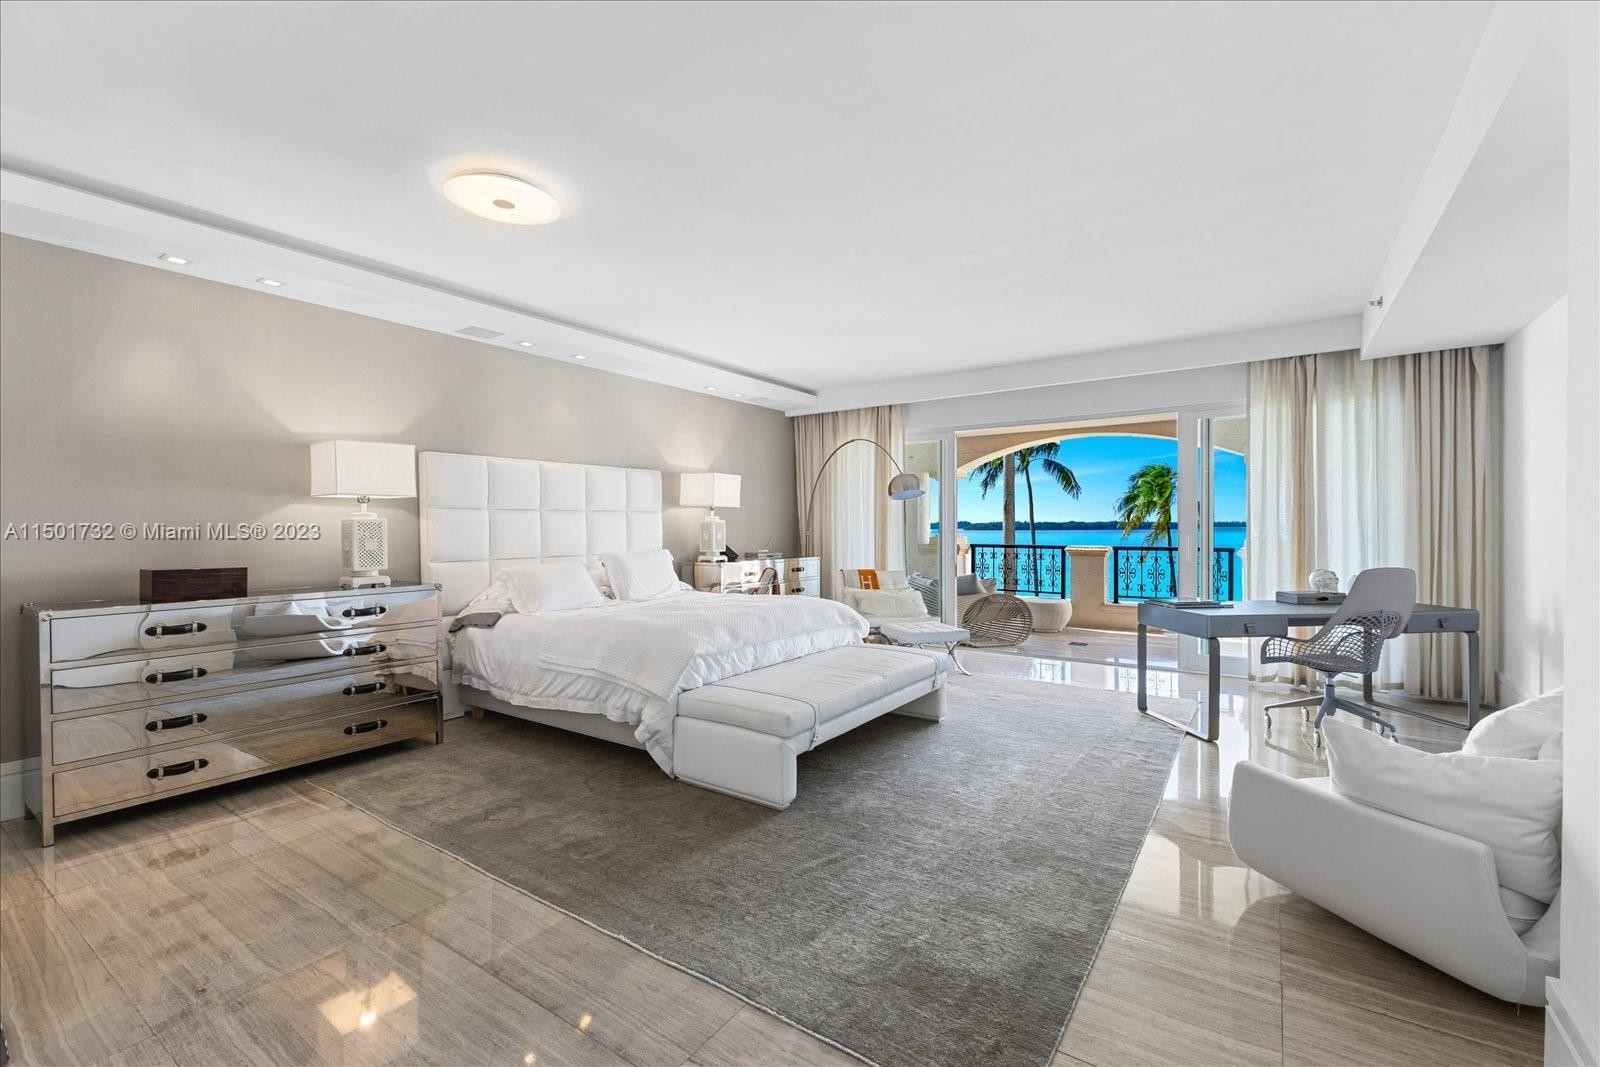 19. 5223 Fisher Island Dr